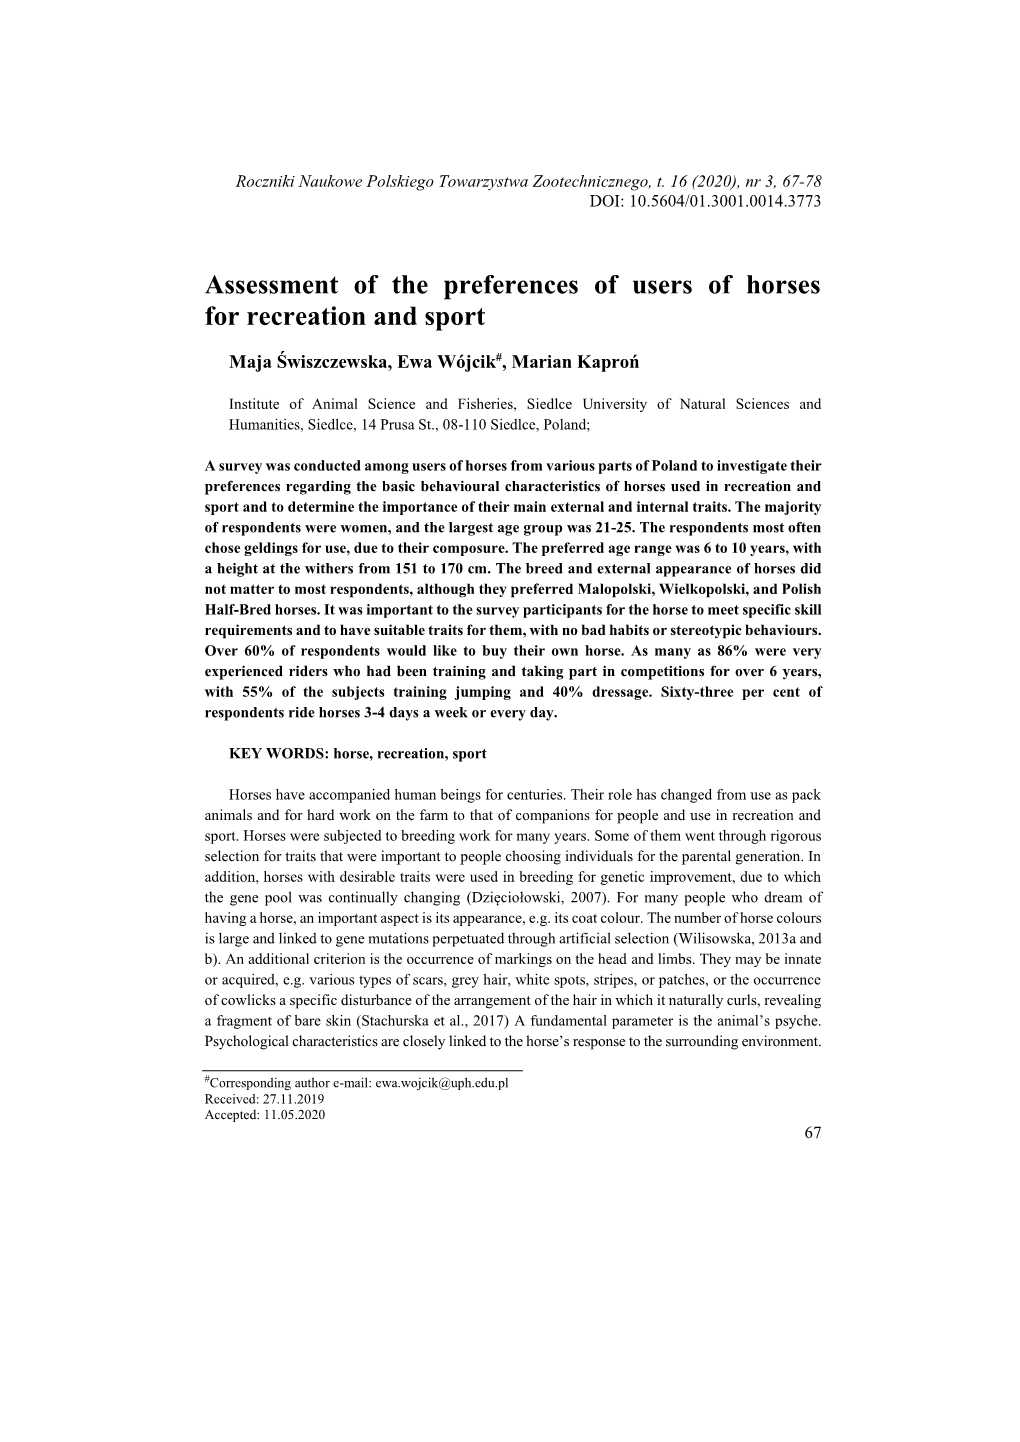 Assessment of the Preferences of Users of Horses for Recreation and Sport